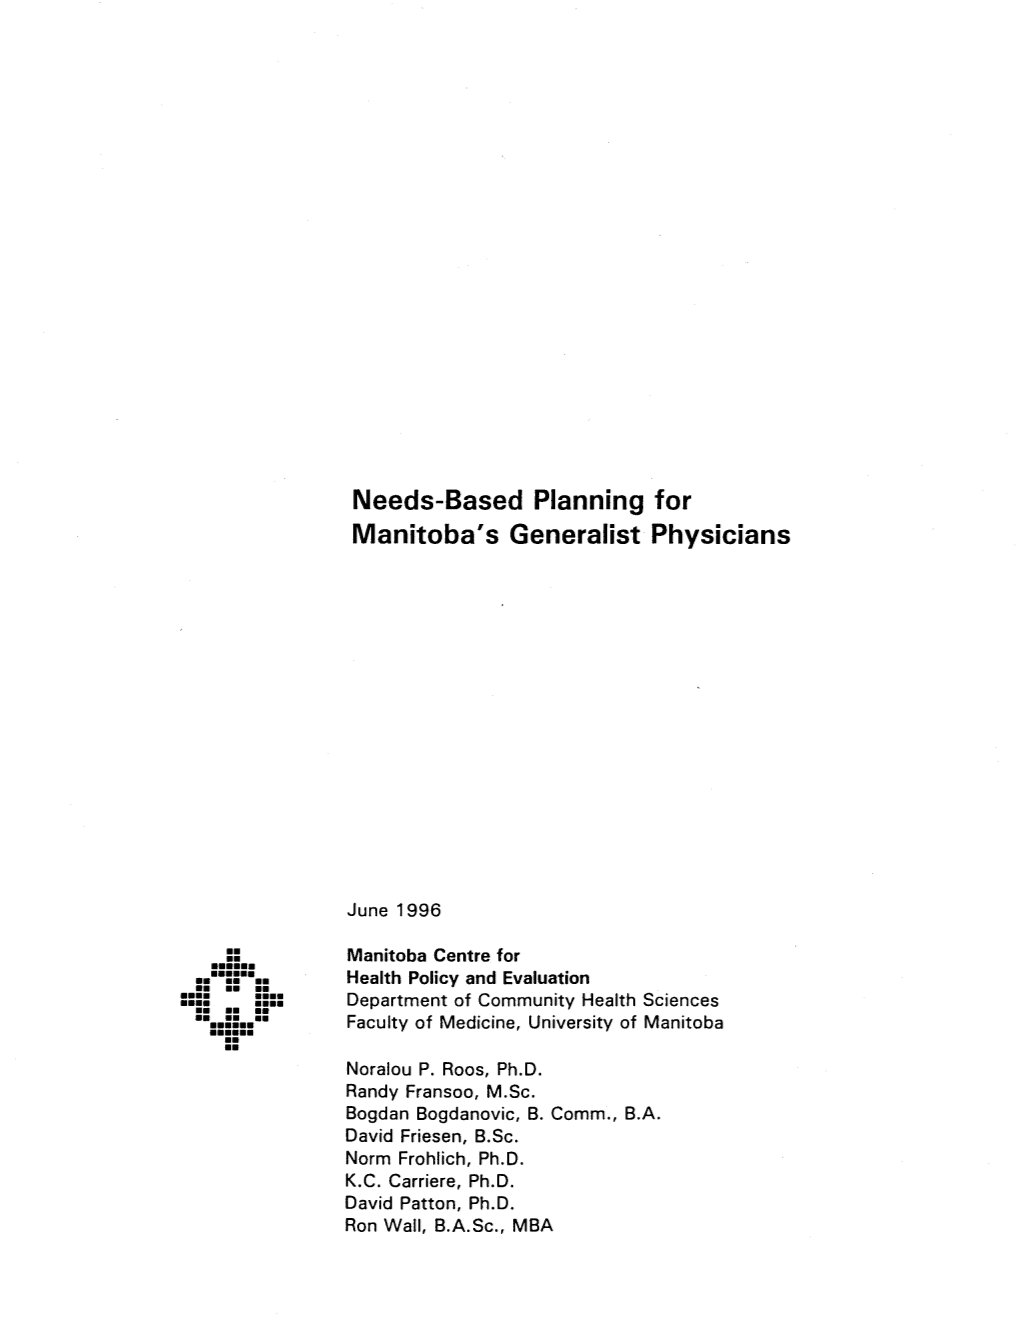 Needs-Based Planning for Manitoba's Generalist Physicians